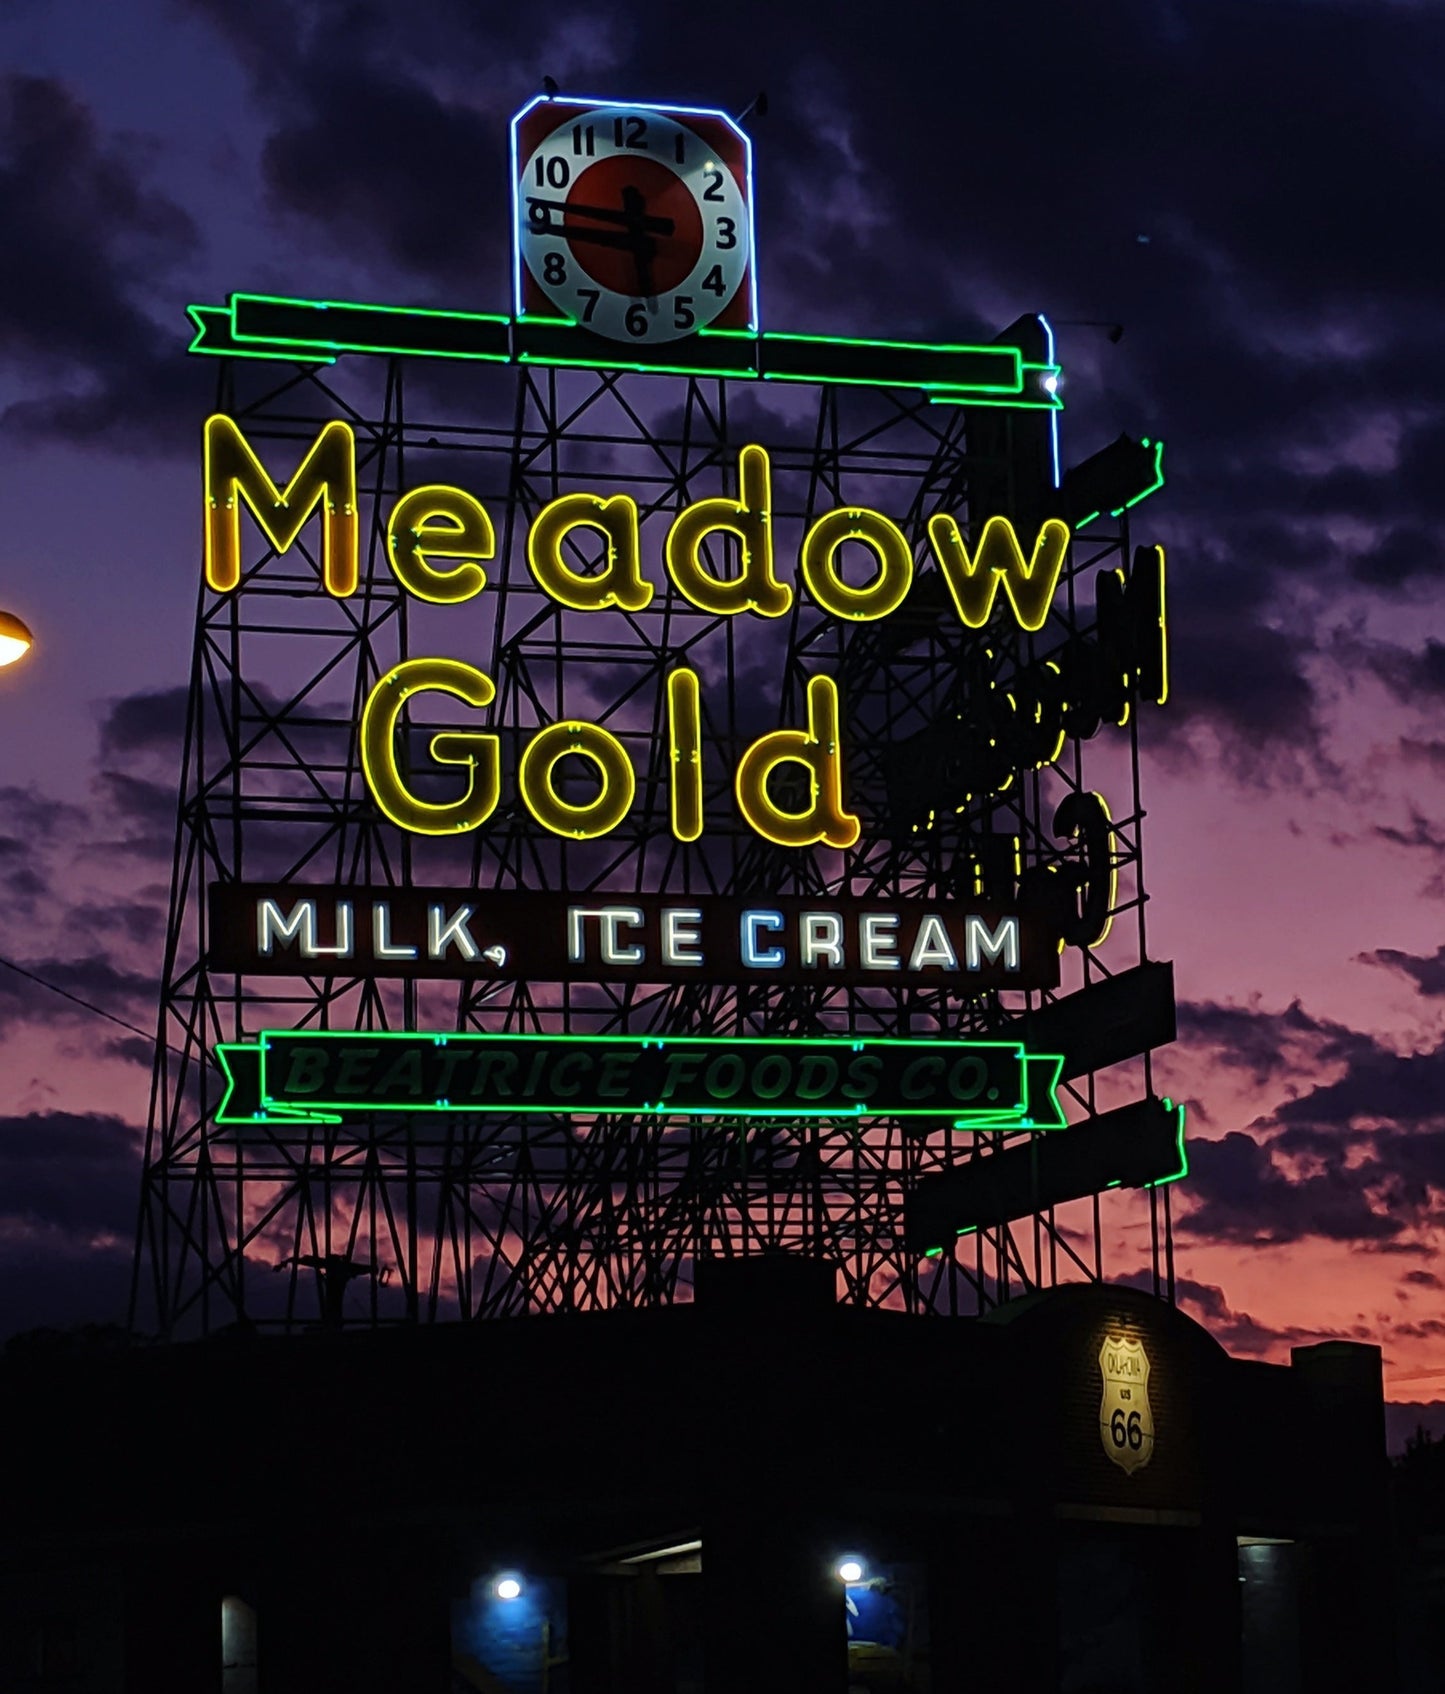 Route 66 Meadow Gold Neon Sign at Sunset photographic print